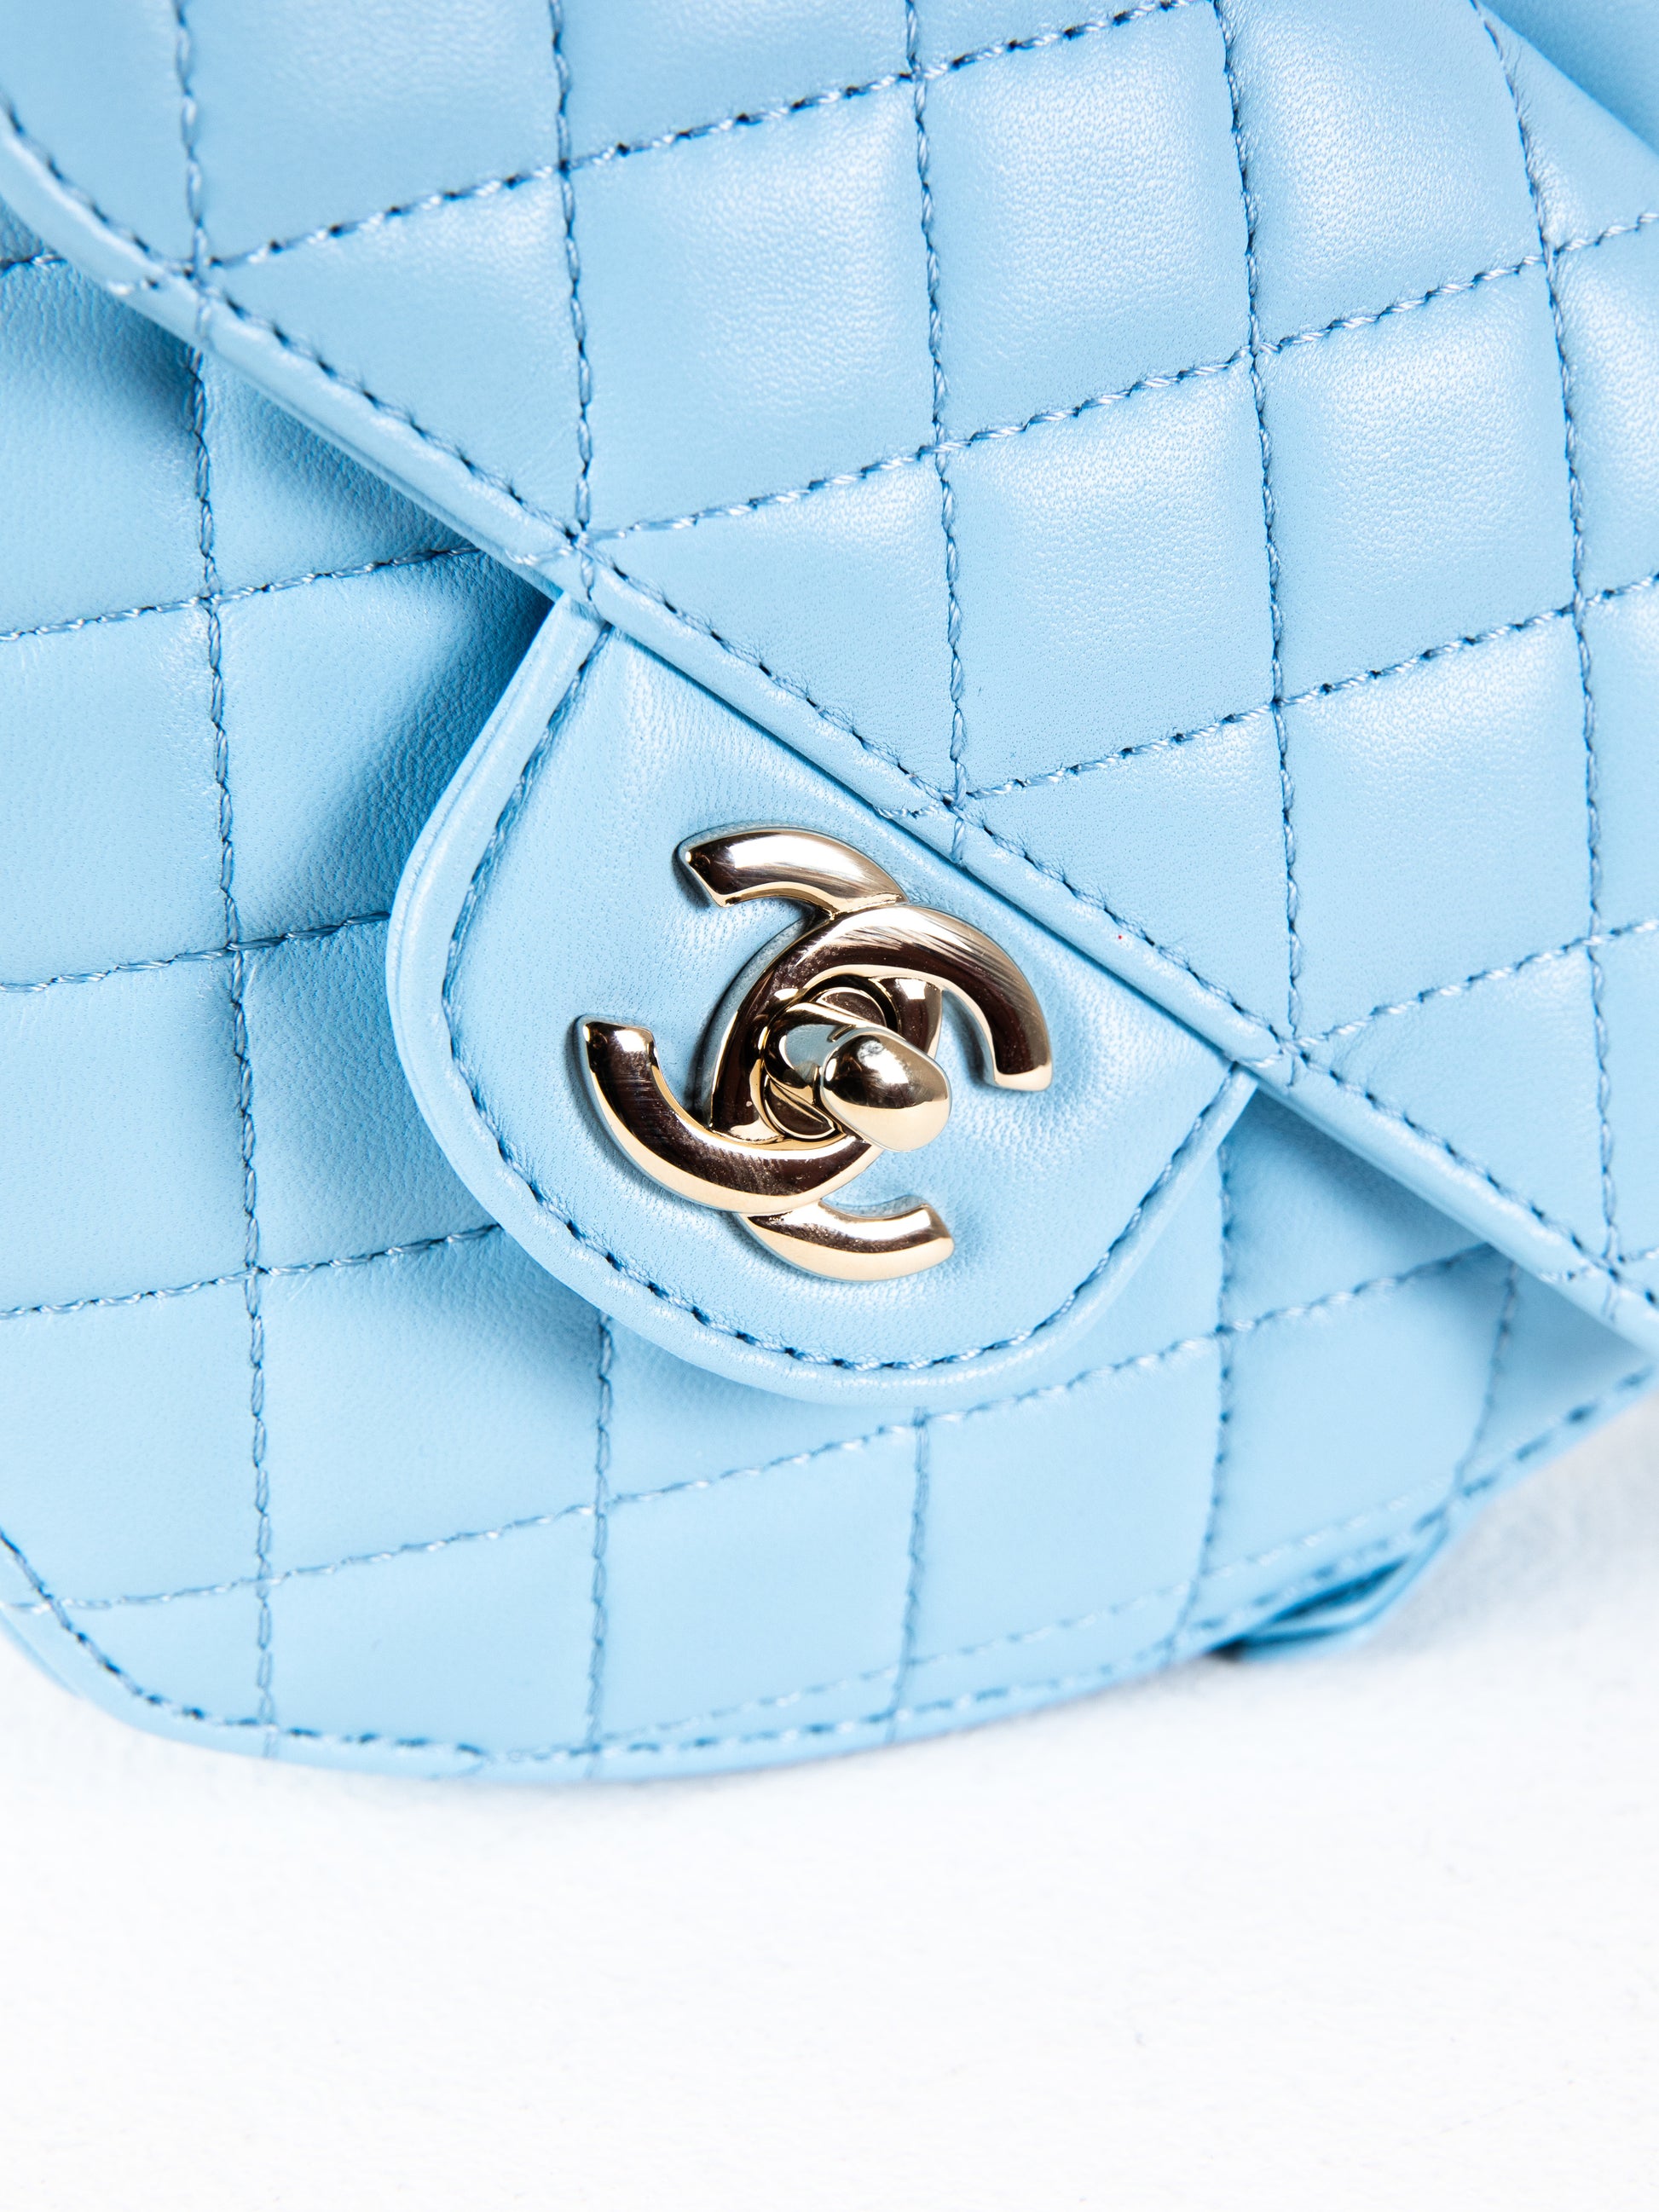 Chanel Light Blue Heart Bag in Large Size